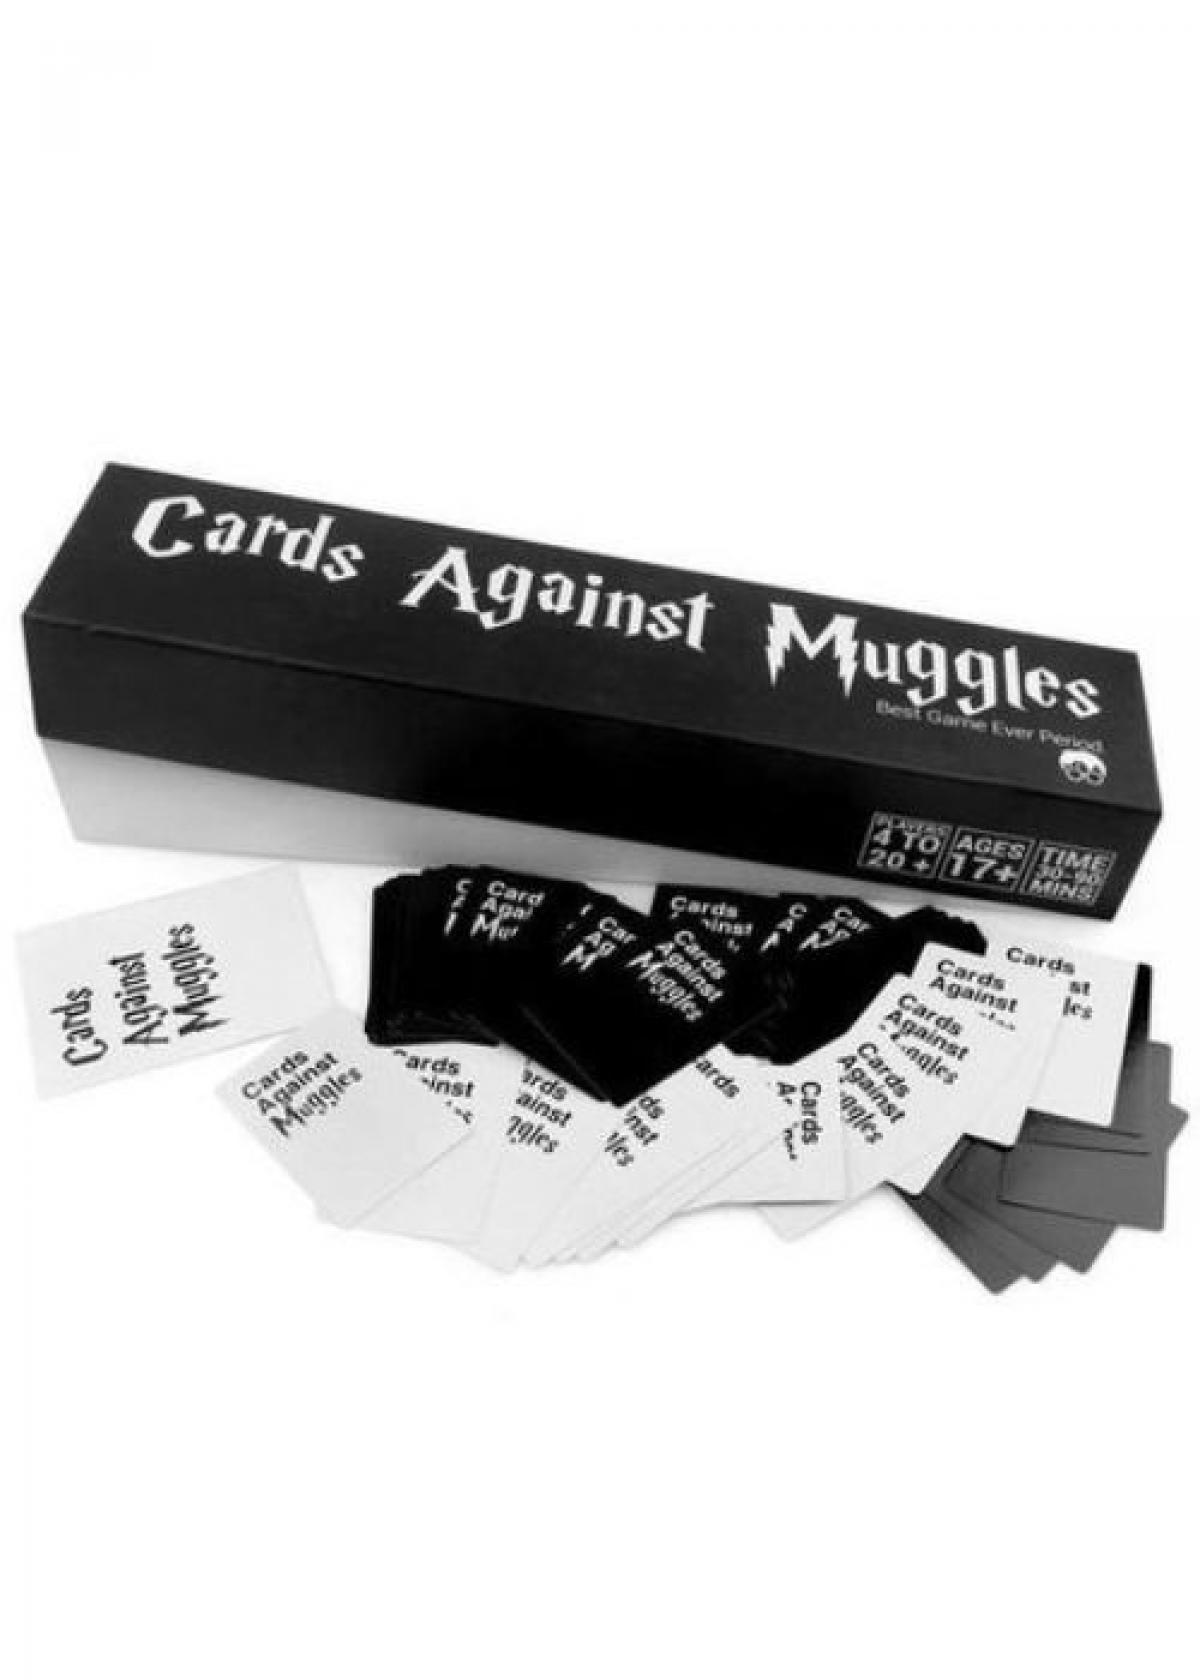 Cards against muggles